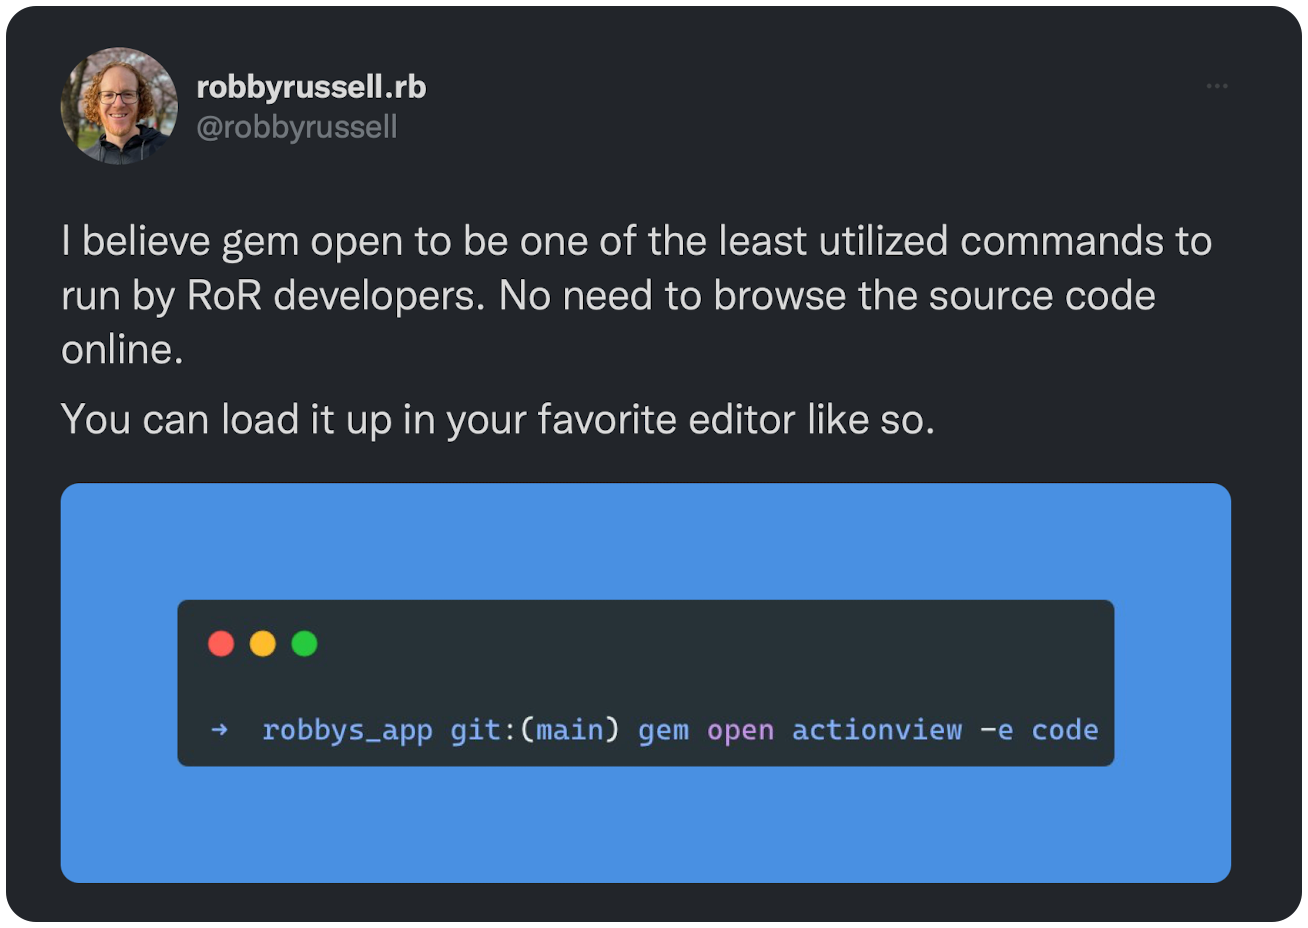 I believe gem open to be one of the least utilized commands to run by RoR developers. No need to browse the source code online. You can load it up in your favorite editor like so.